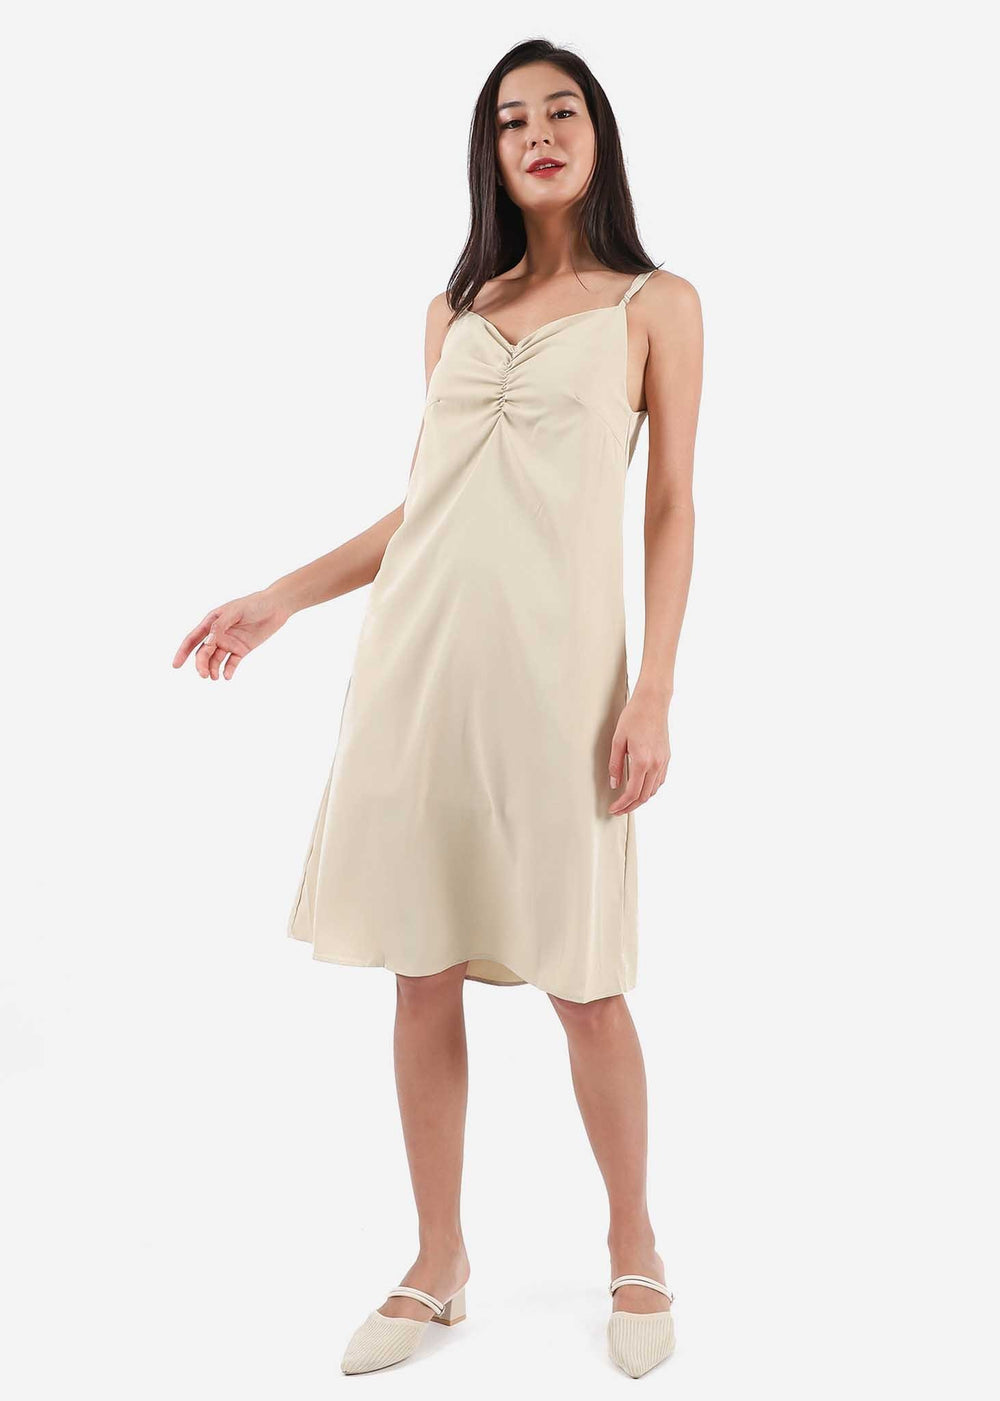 Gracia Ruched Dress #6stylexclusive